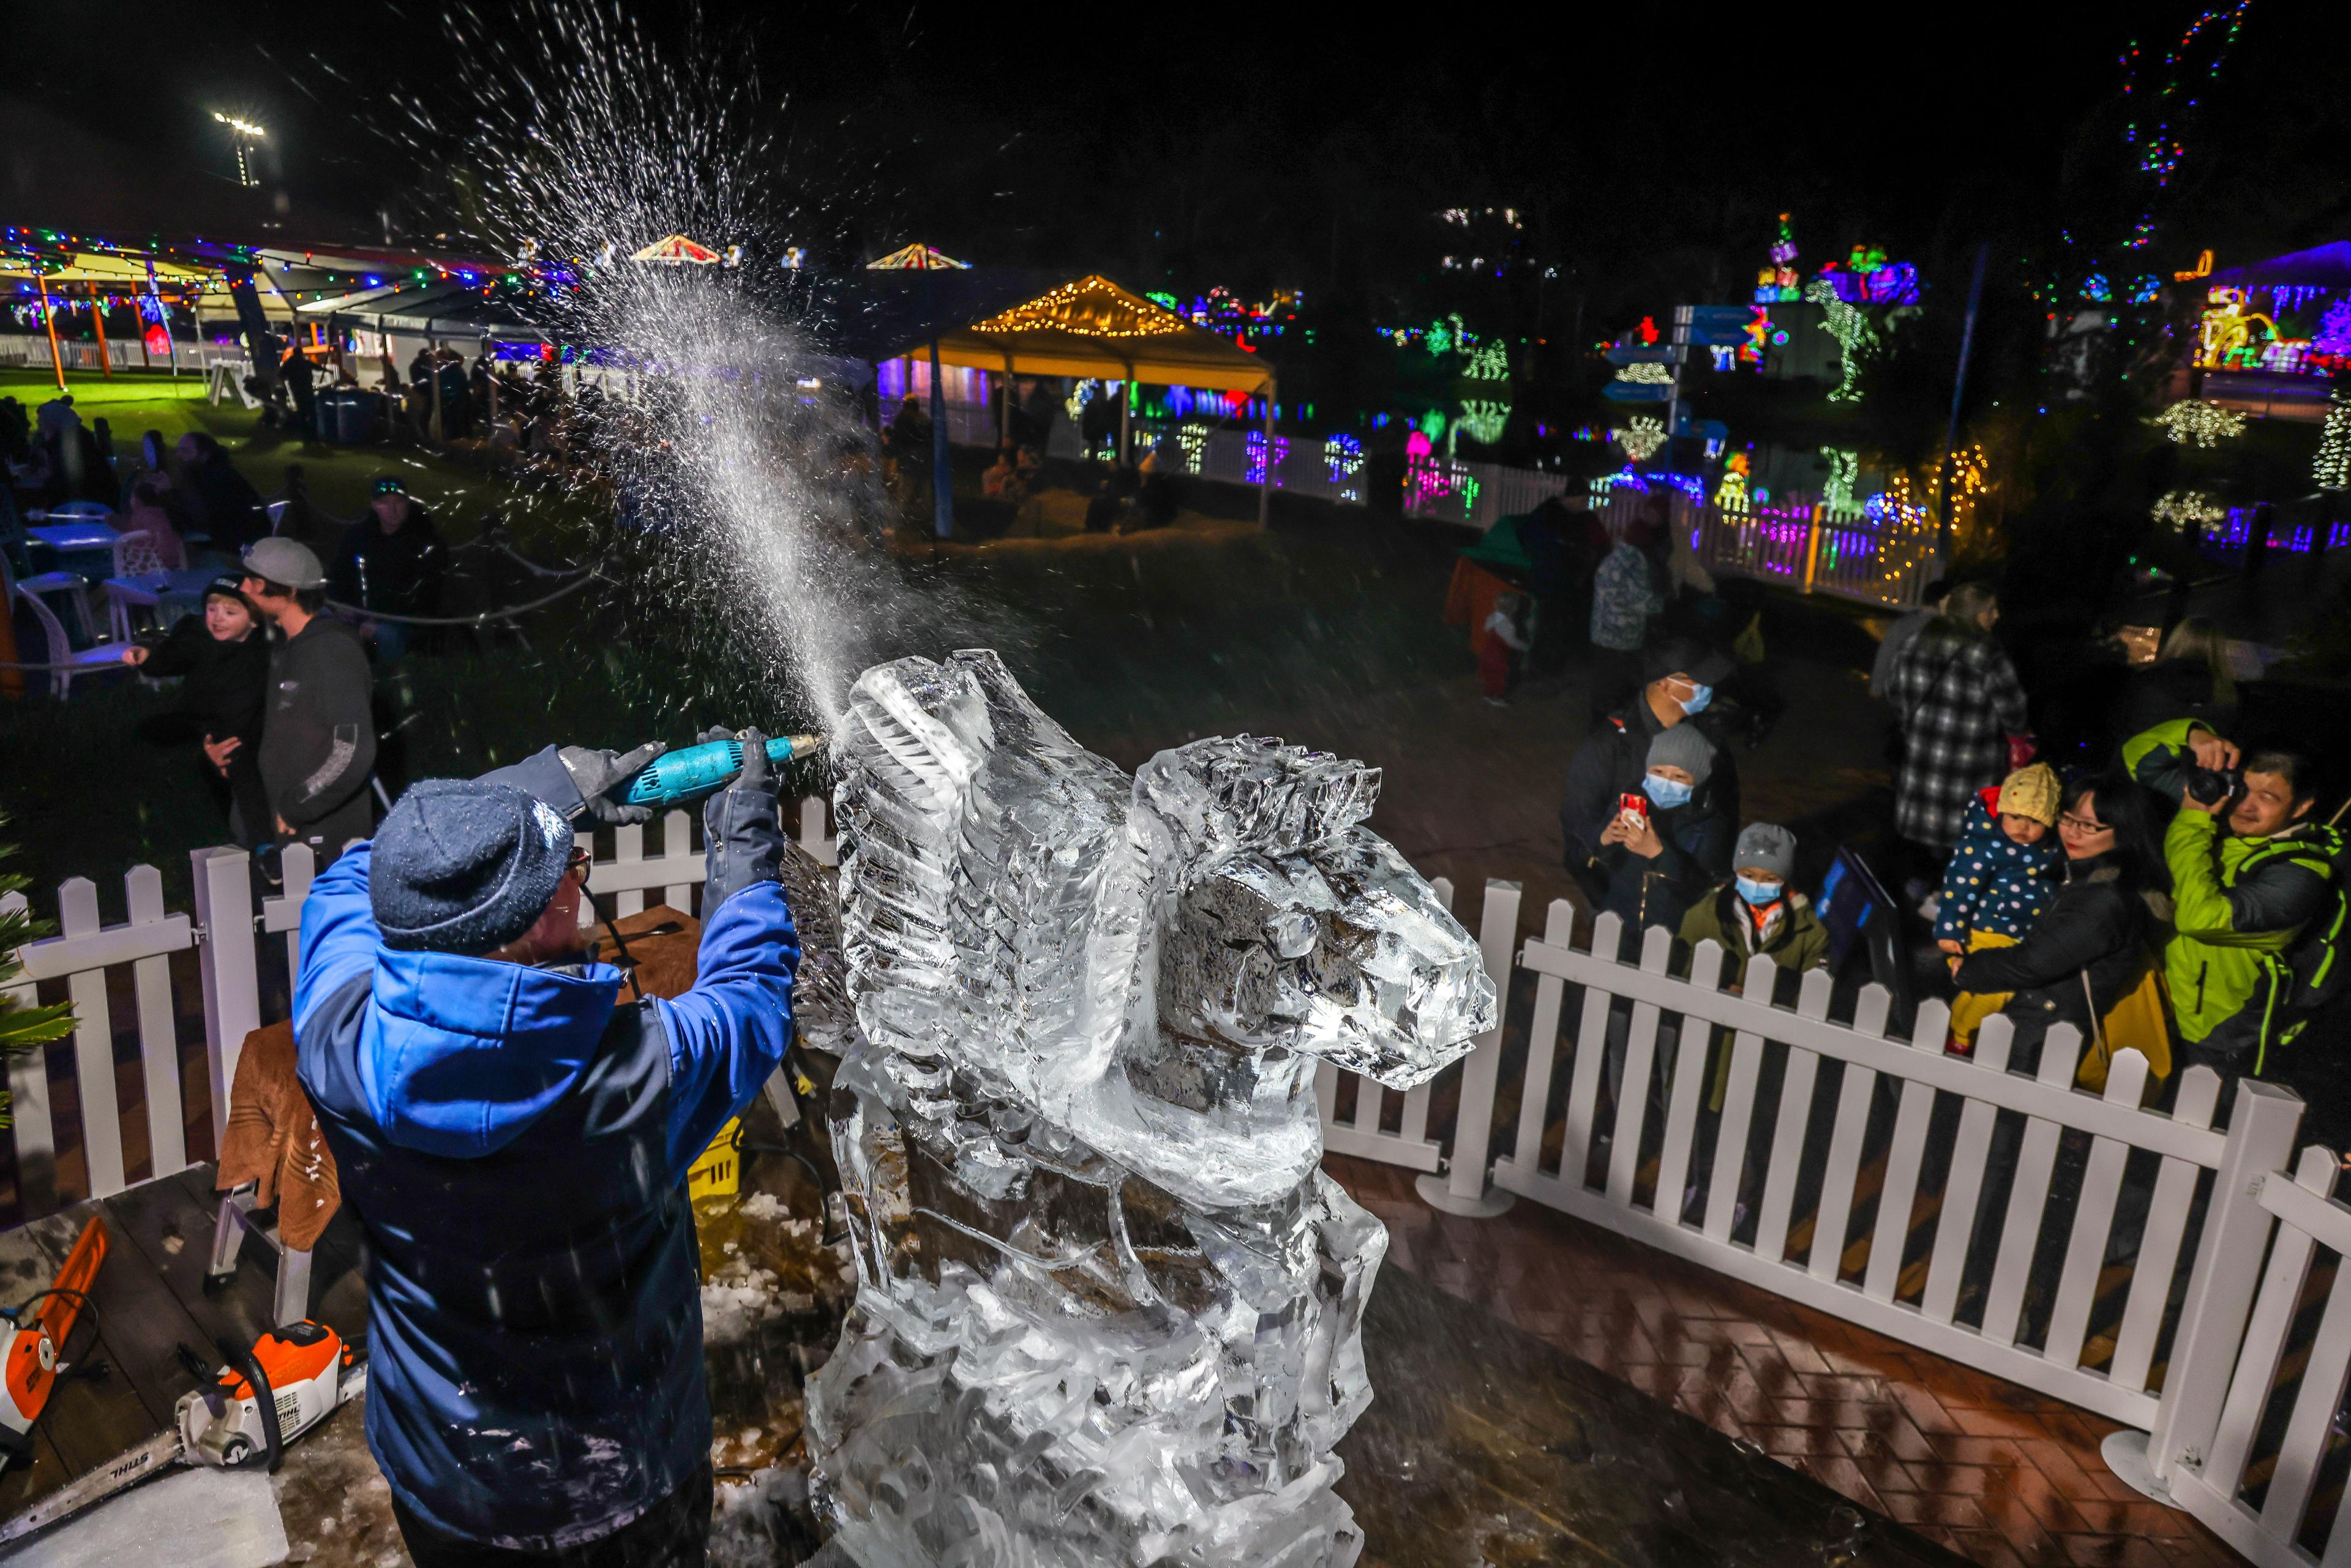 See ice-sculpting and fire-twirling displays background